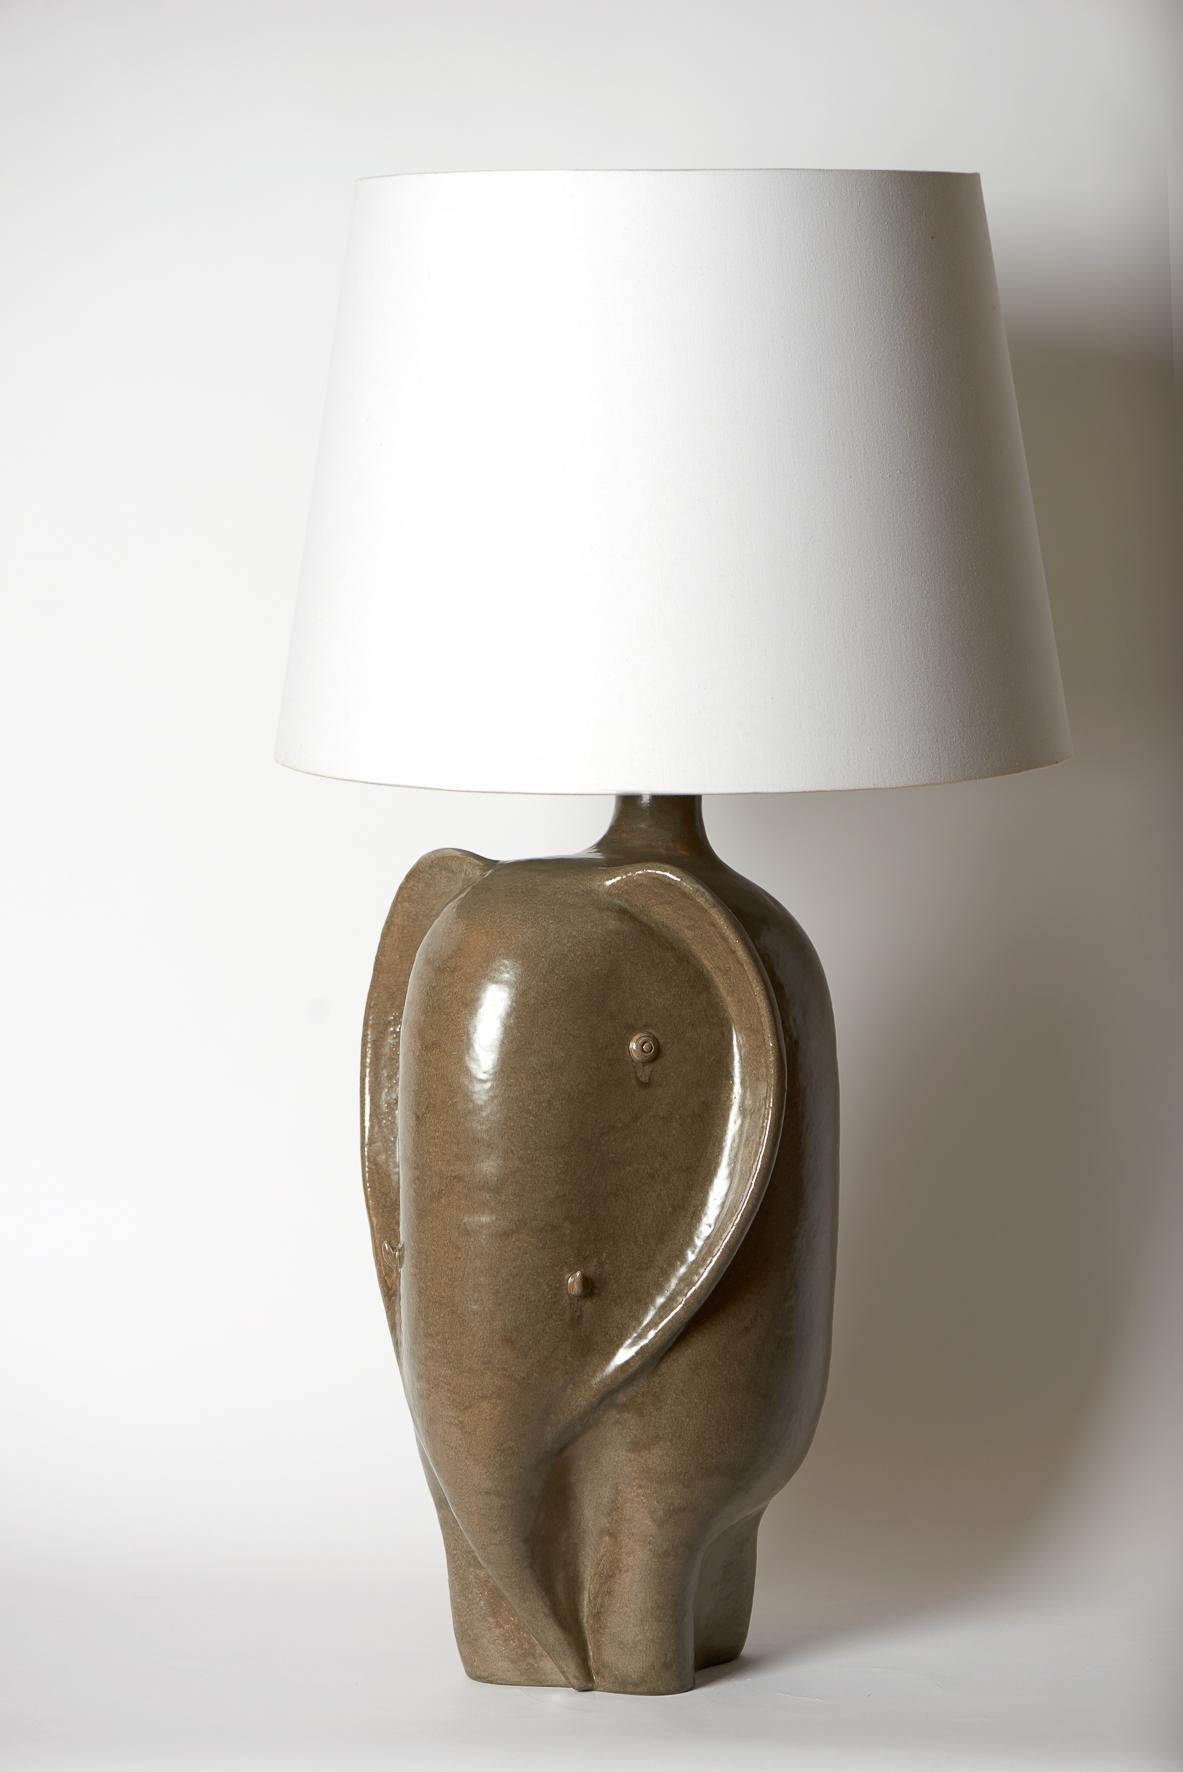 Large hand-sculpted ceramic lamp base, stylized elephant stoneware glazed in Khaki color enamel.
One of a kind handmade piece signed by the French ceramicists Dalo 
The height dimension (57 cm) is for the ceramic sculpture solely
Note to